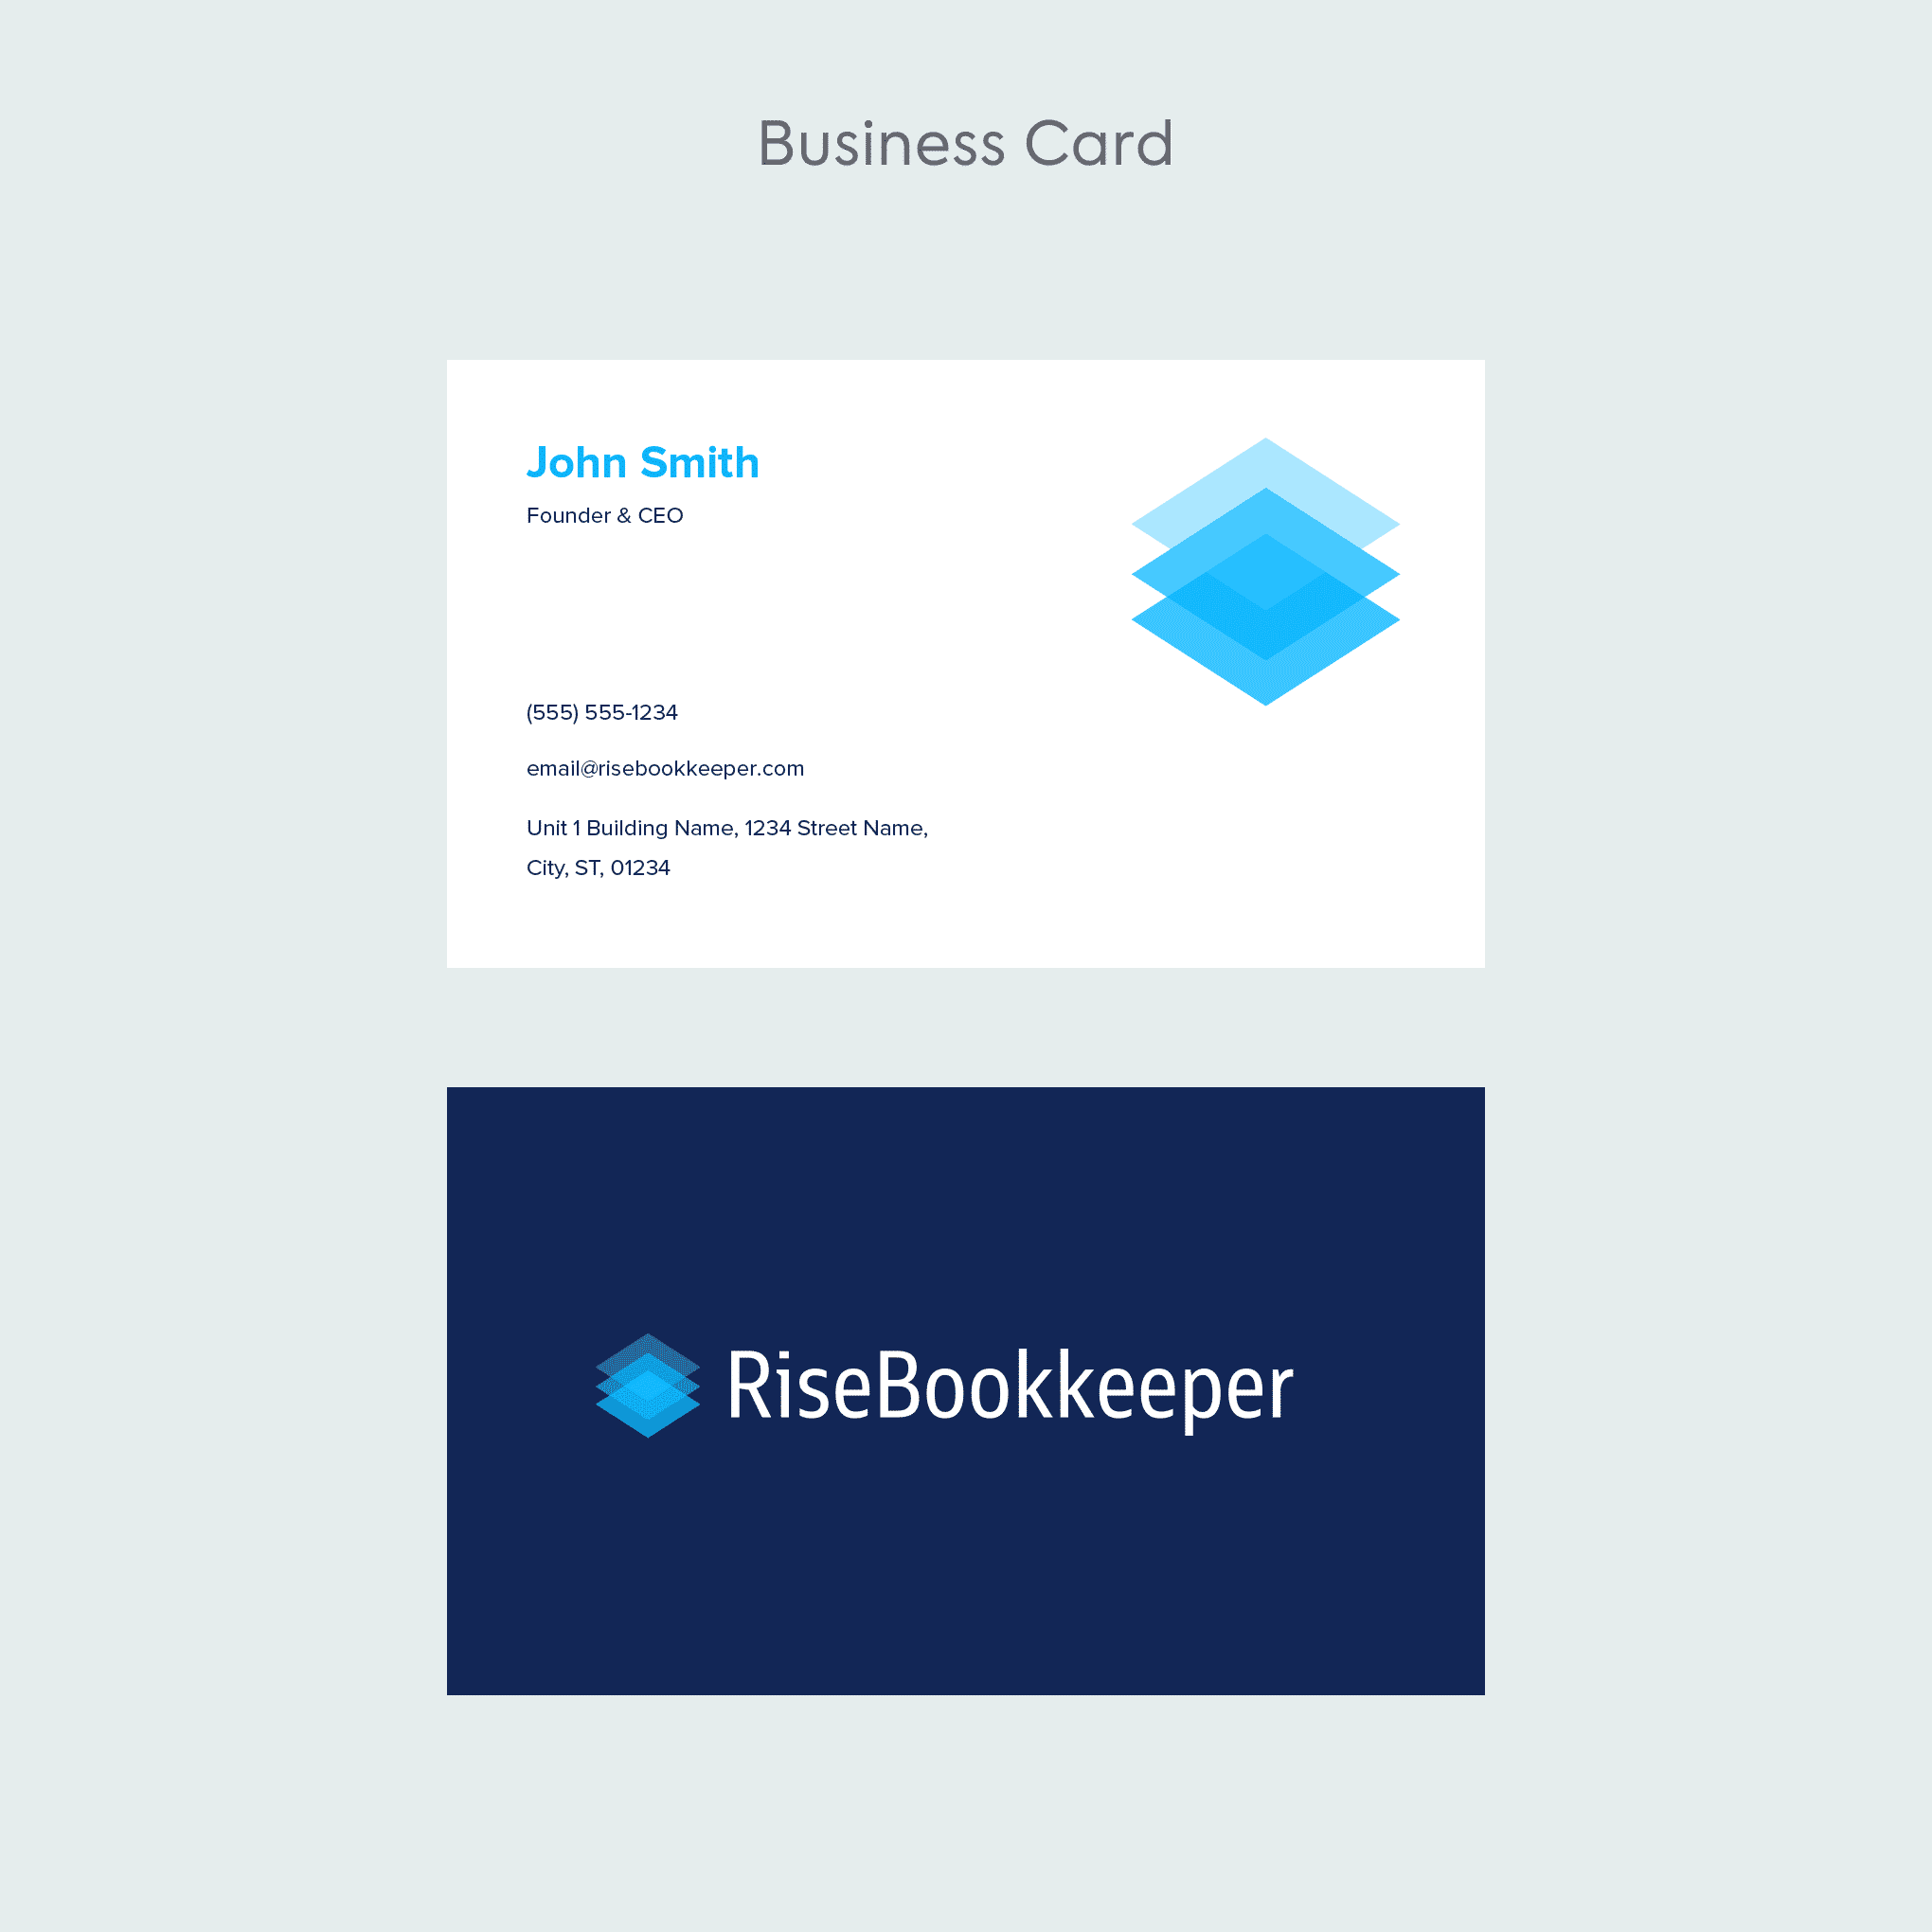 04 - Business Card Template (1)